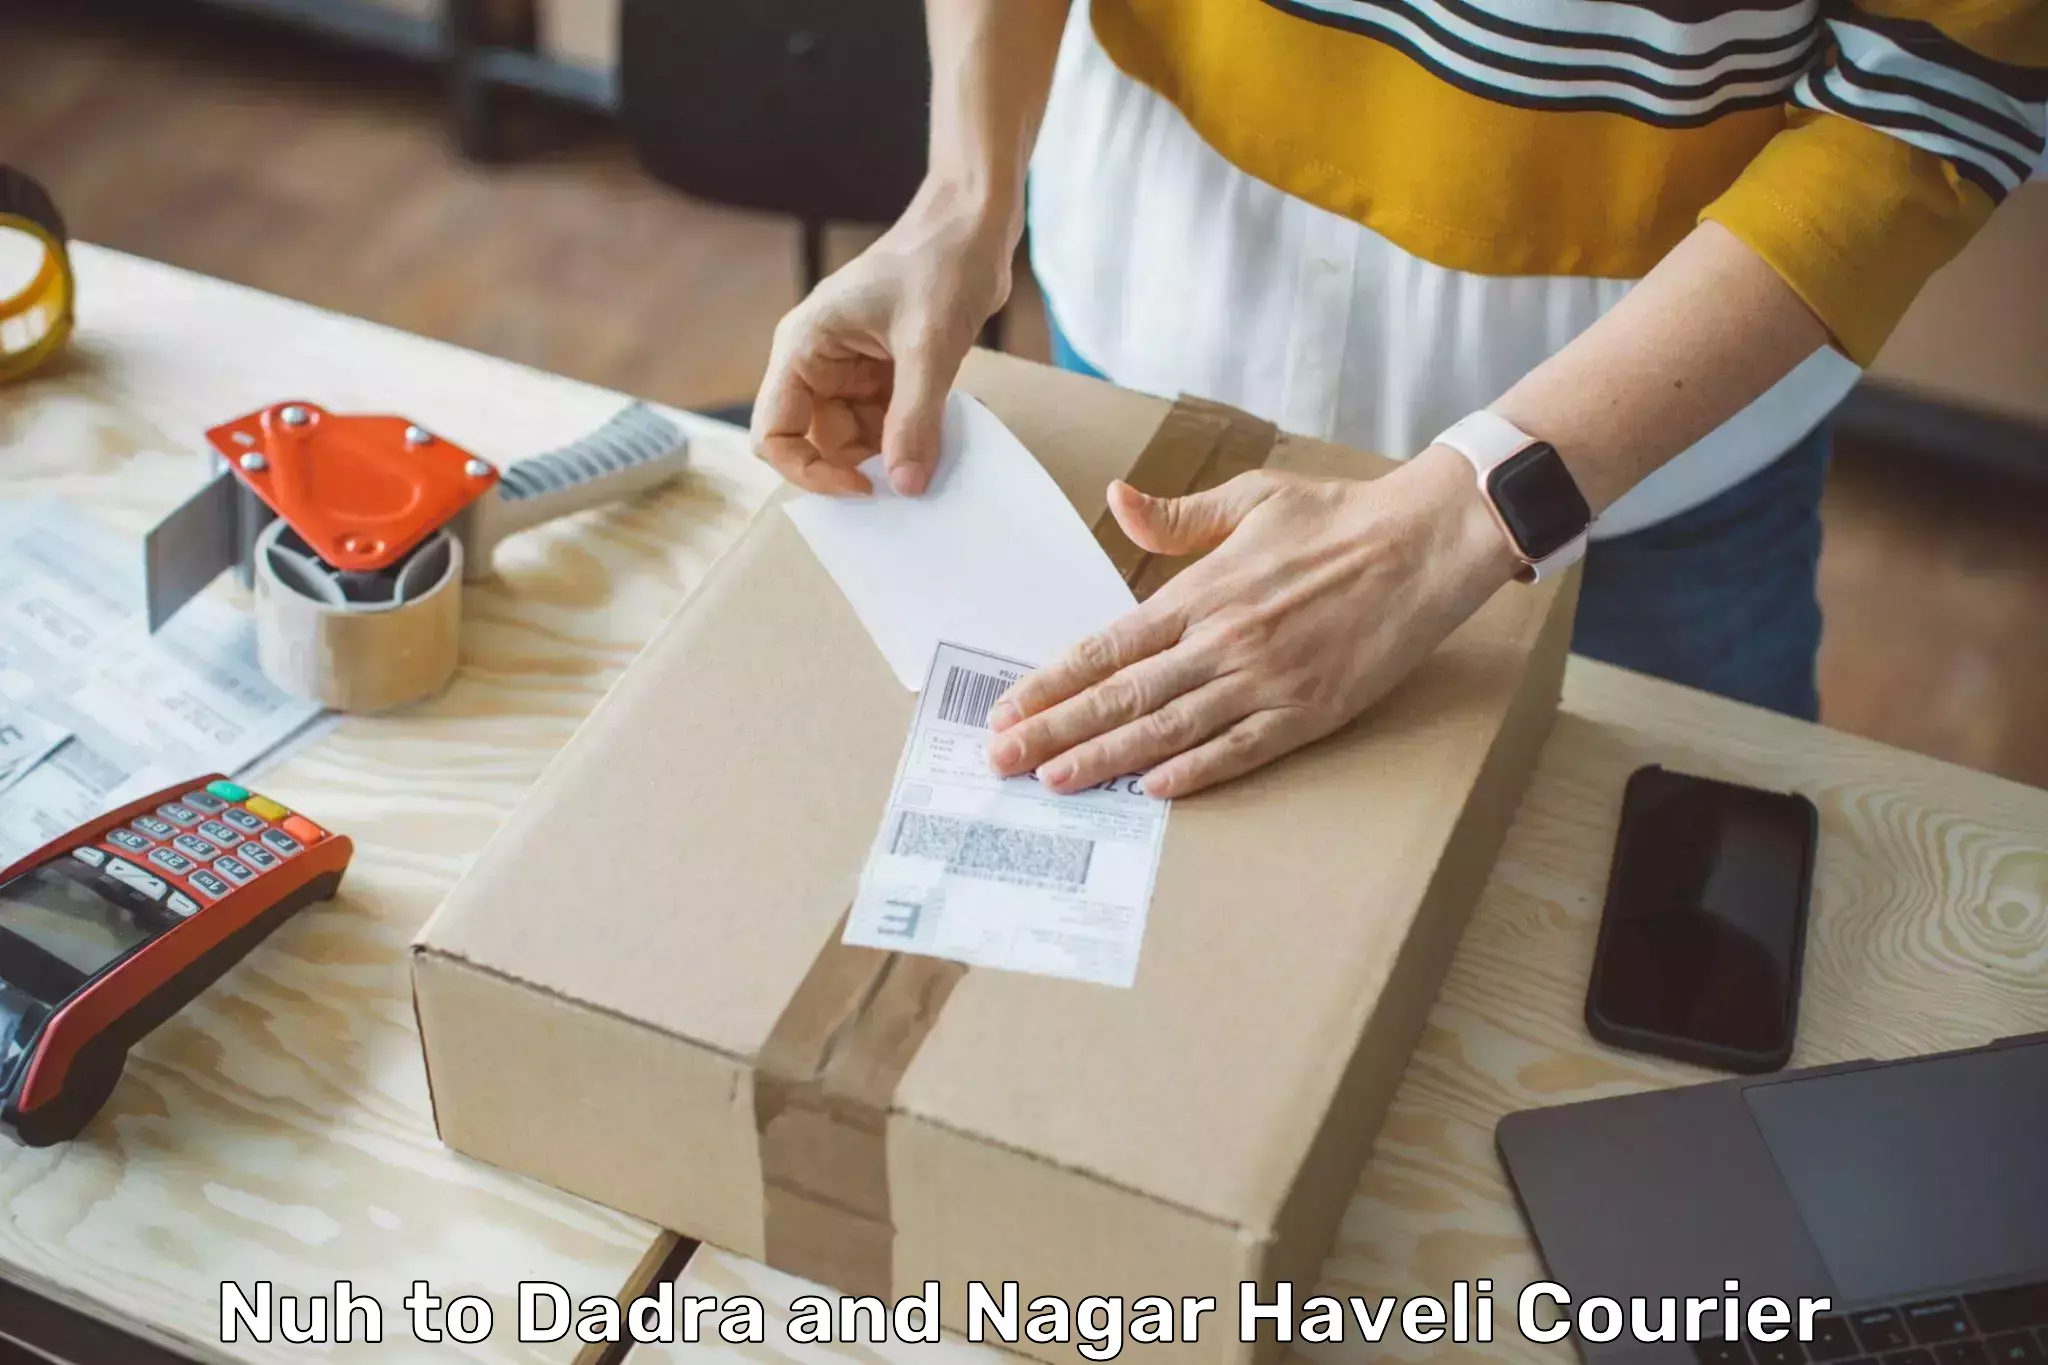 Global courier networks Nuh to Dadra and Nagar Haveli